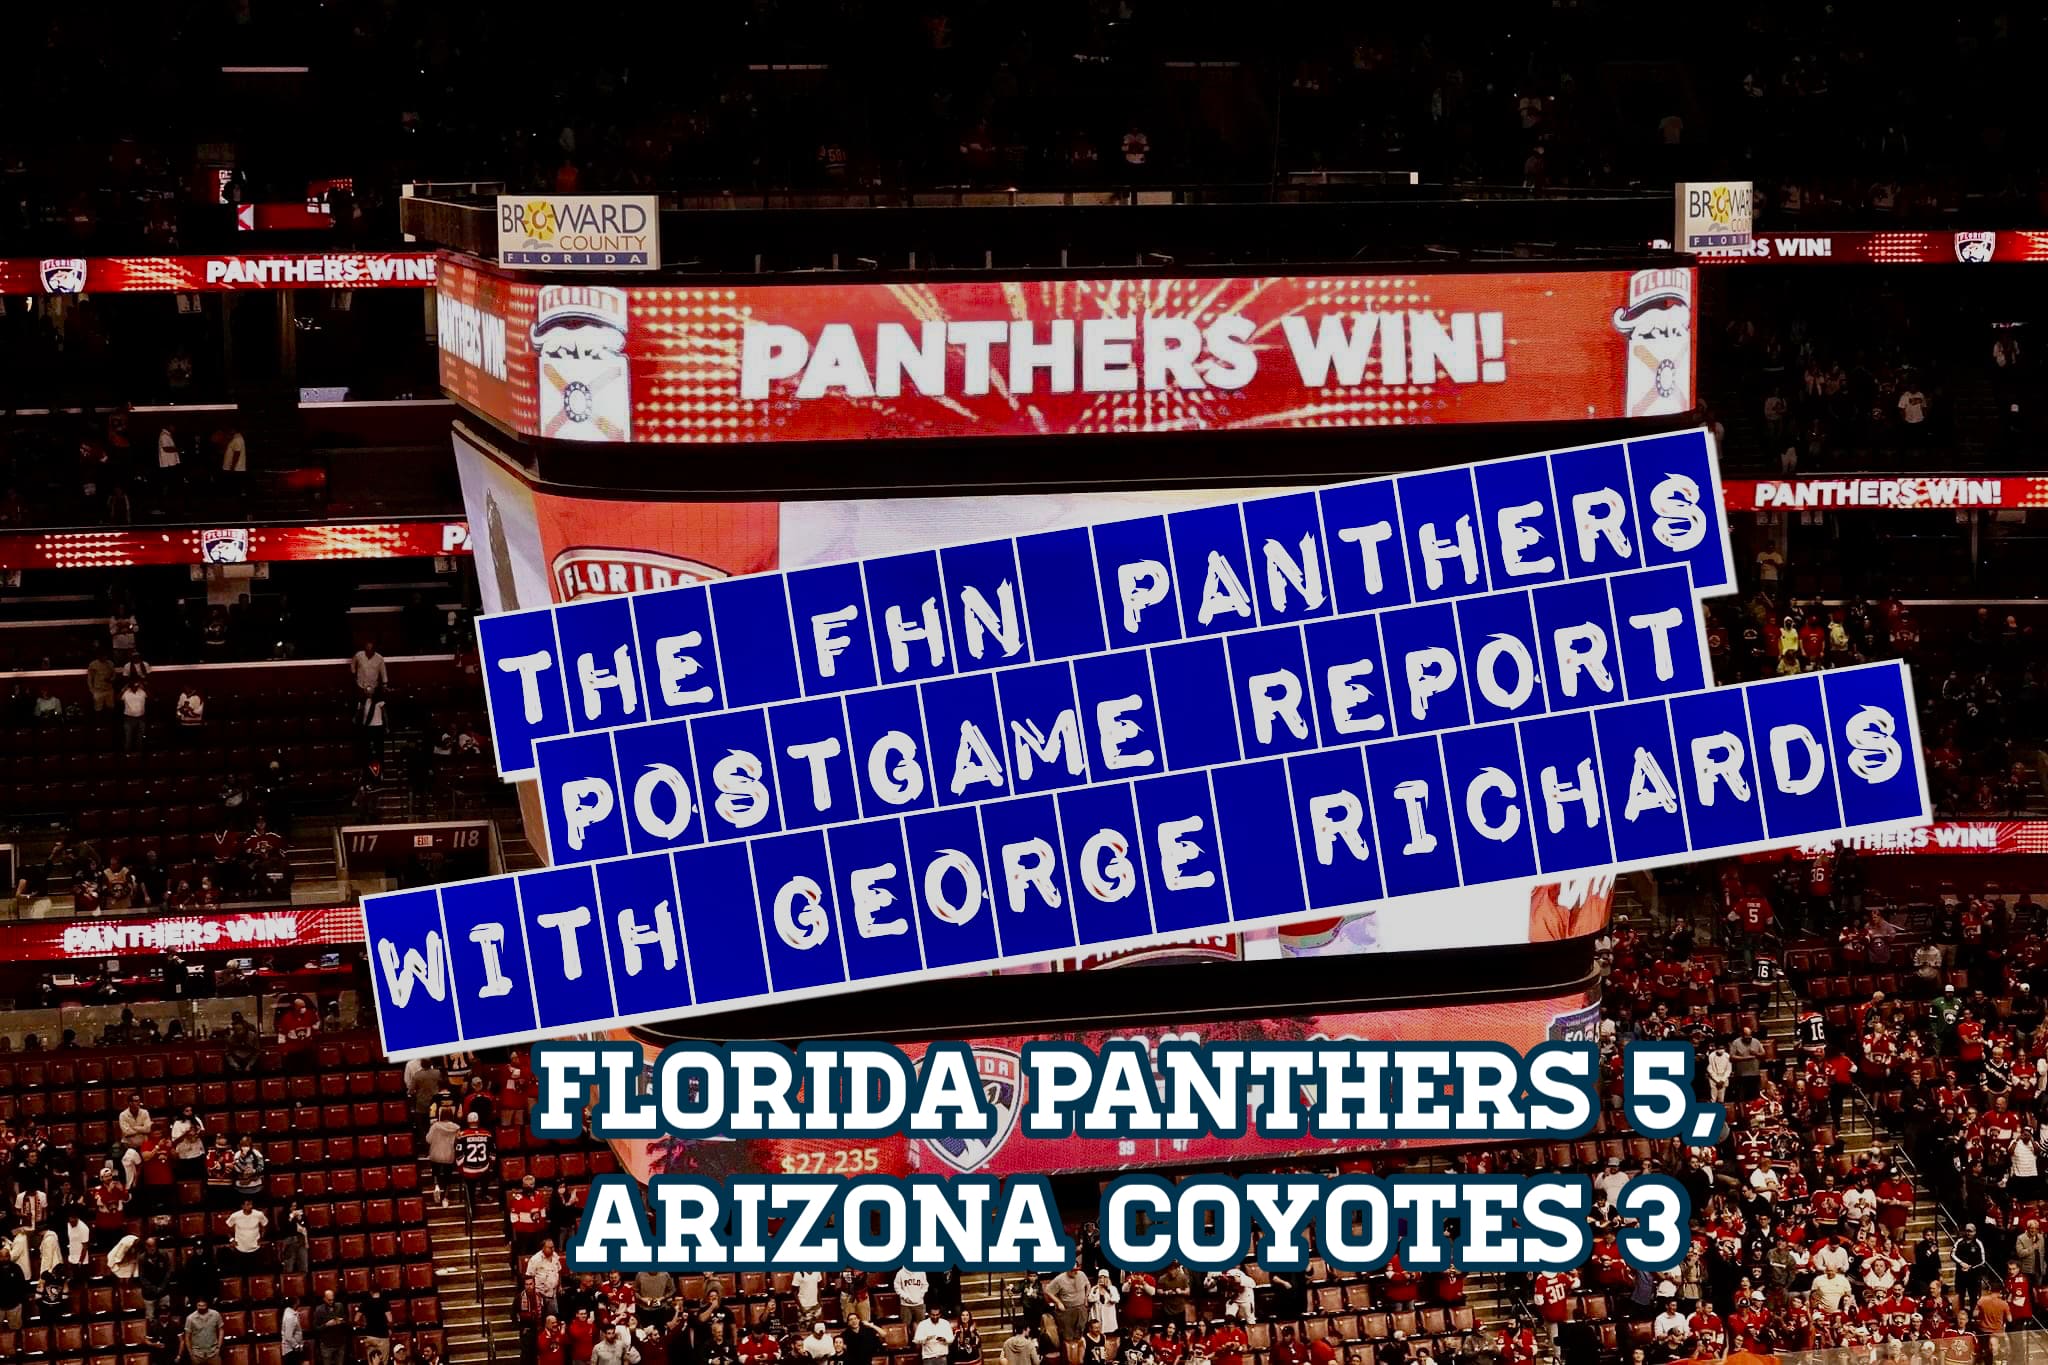 Fhn postgame panthers youtube